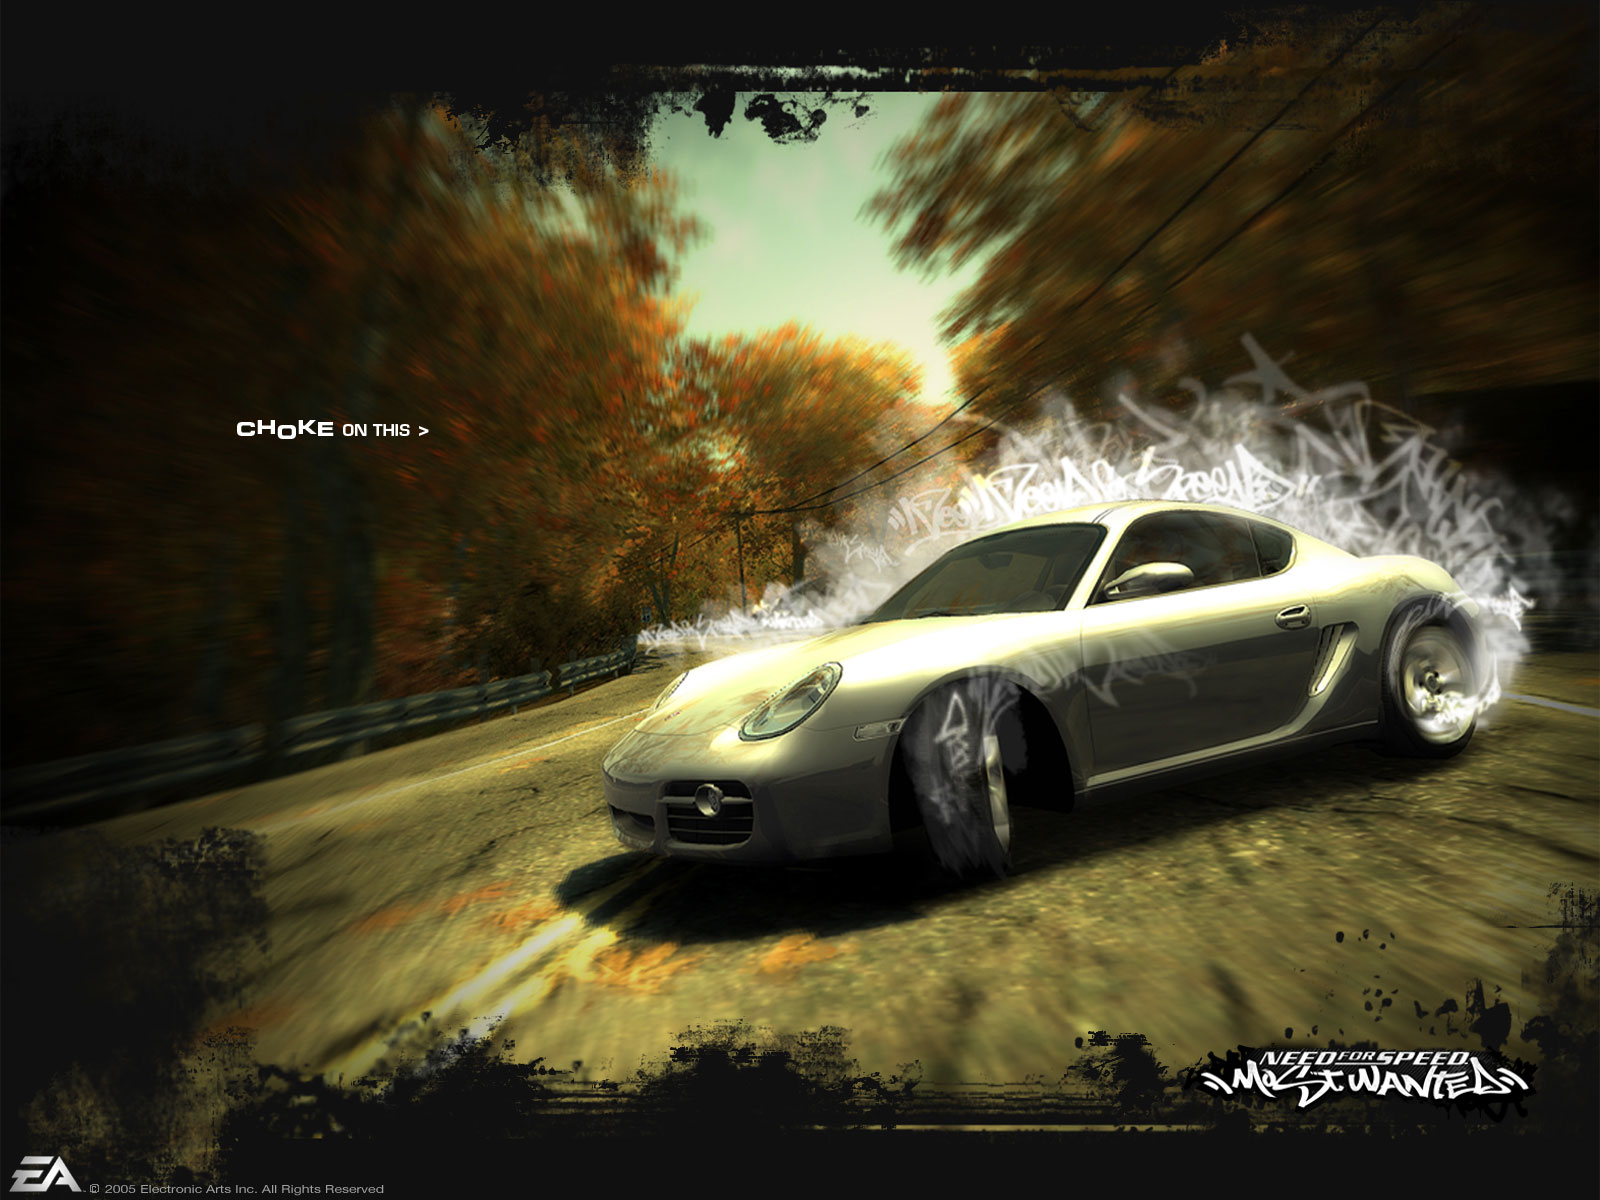 Wallpaper De Need For Speed Most Wanted Yapa